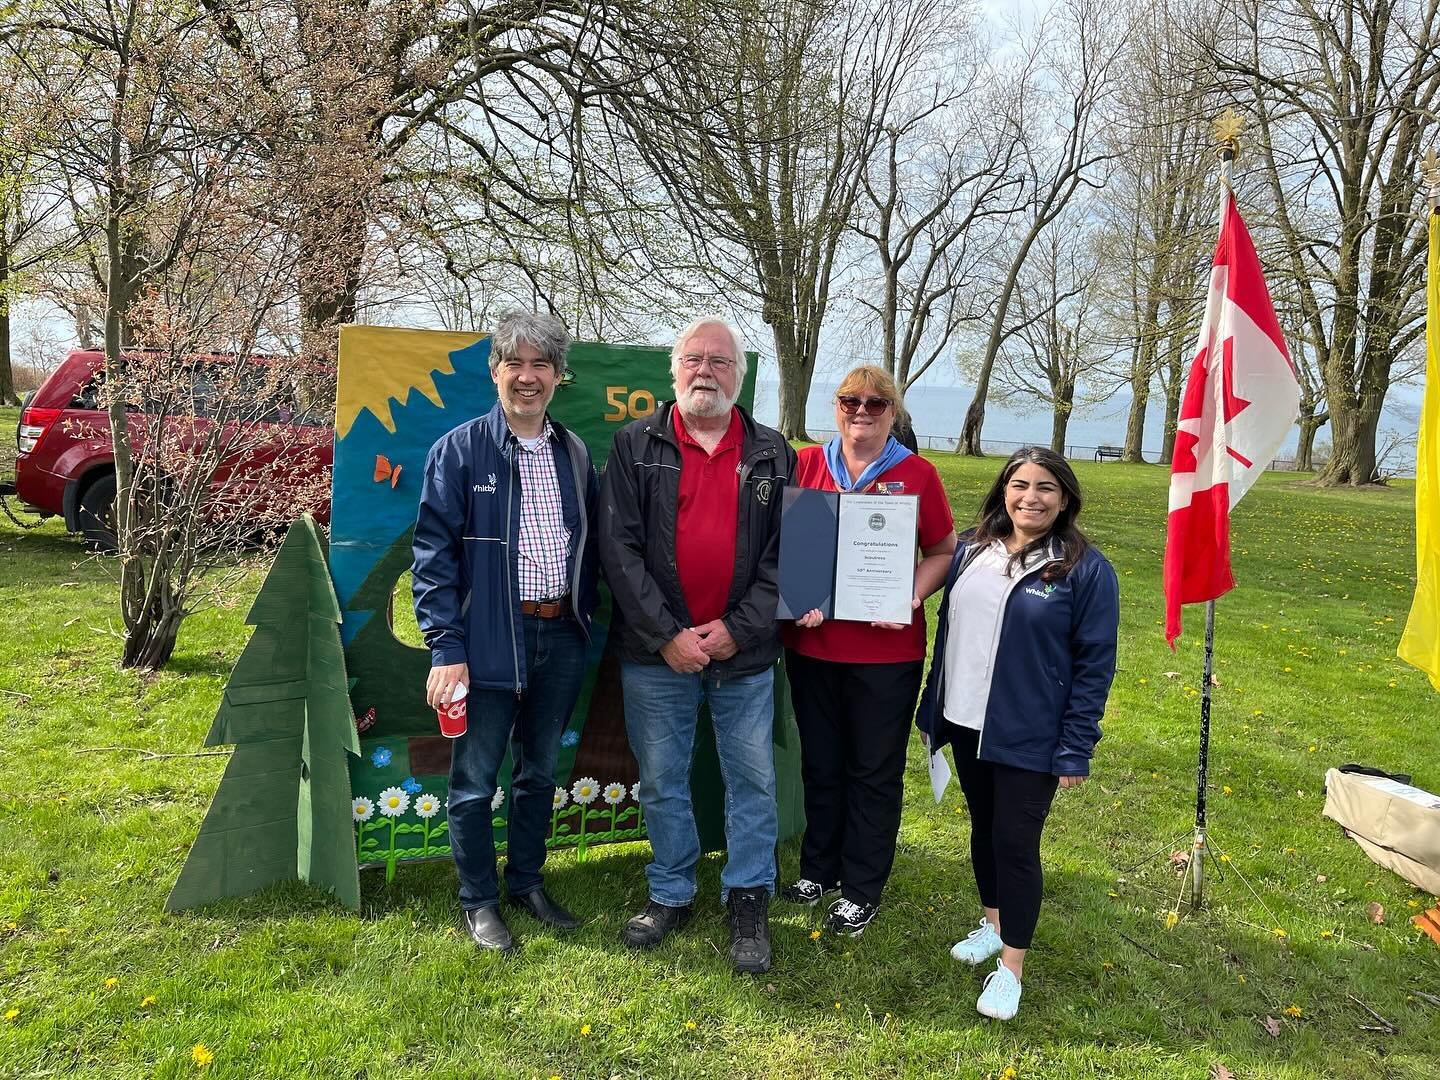 Celebrating 50 years of Scoutrees tree planting today in the Town of Whitby. It was my pleasure to bring greeting on behalf of Mayor Elizabeth Roy and Council. @scoutscanada